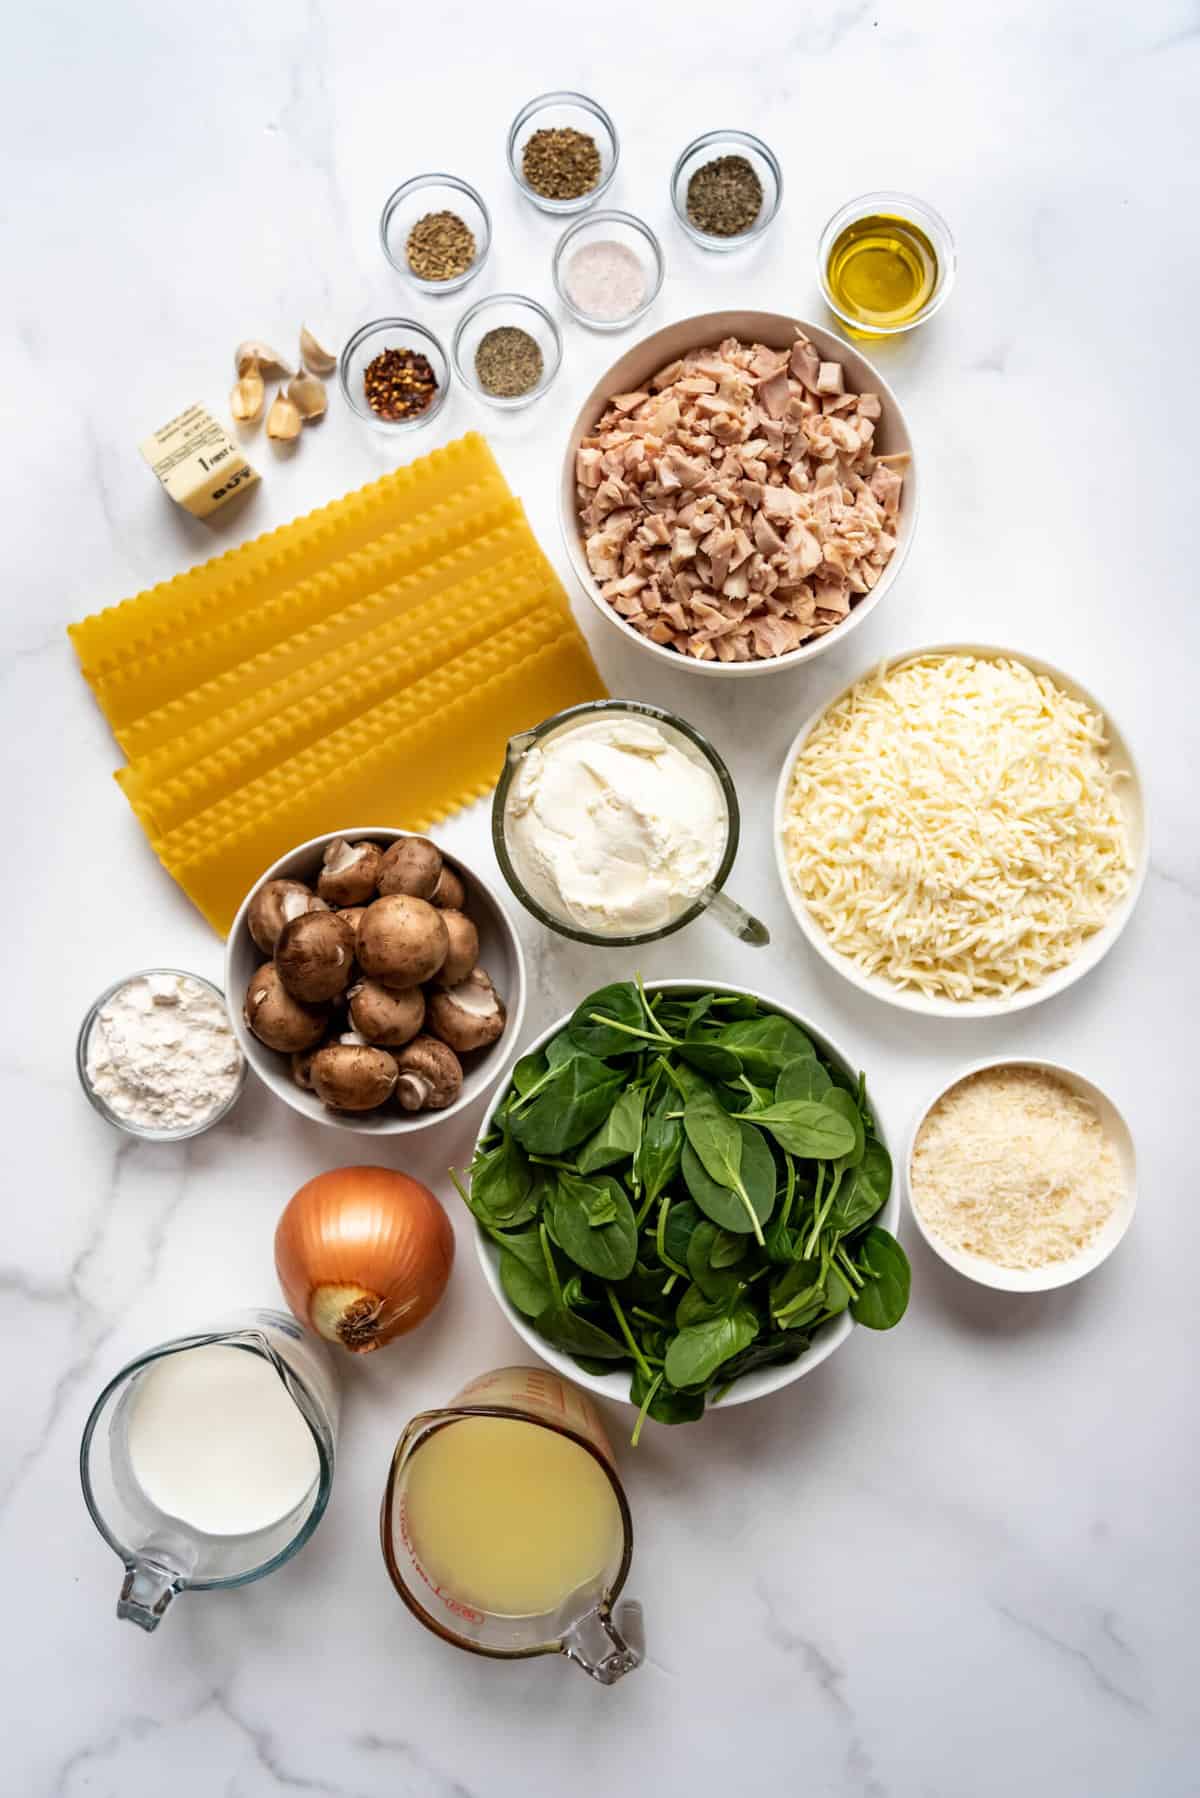 Ingredients for making white chicken lasagna with spinach and mushrooms.